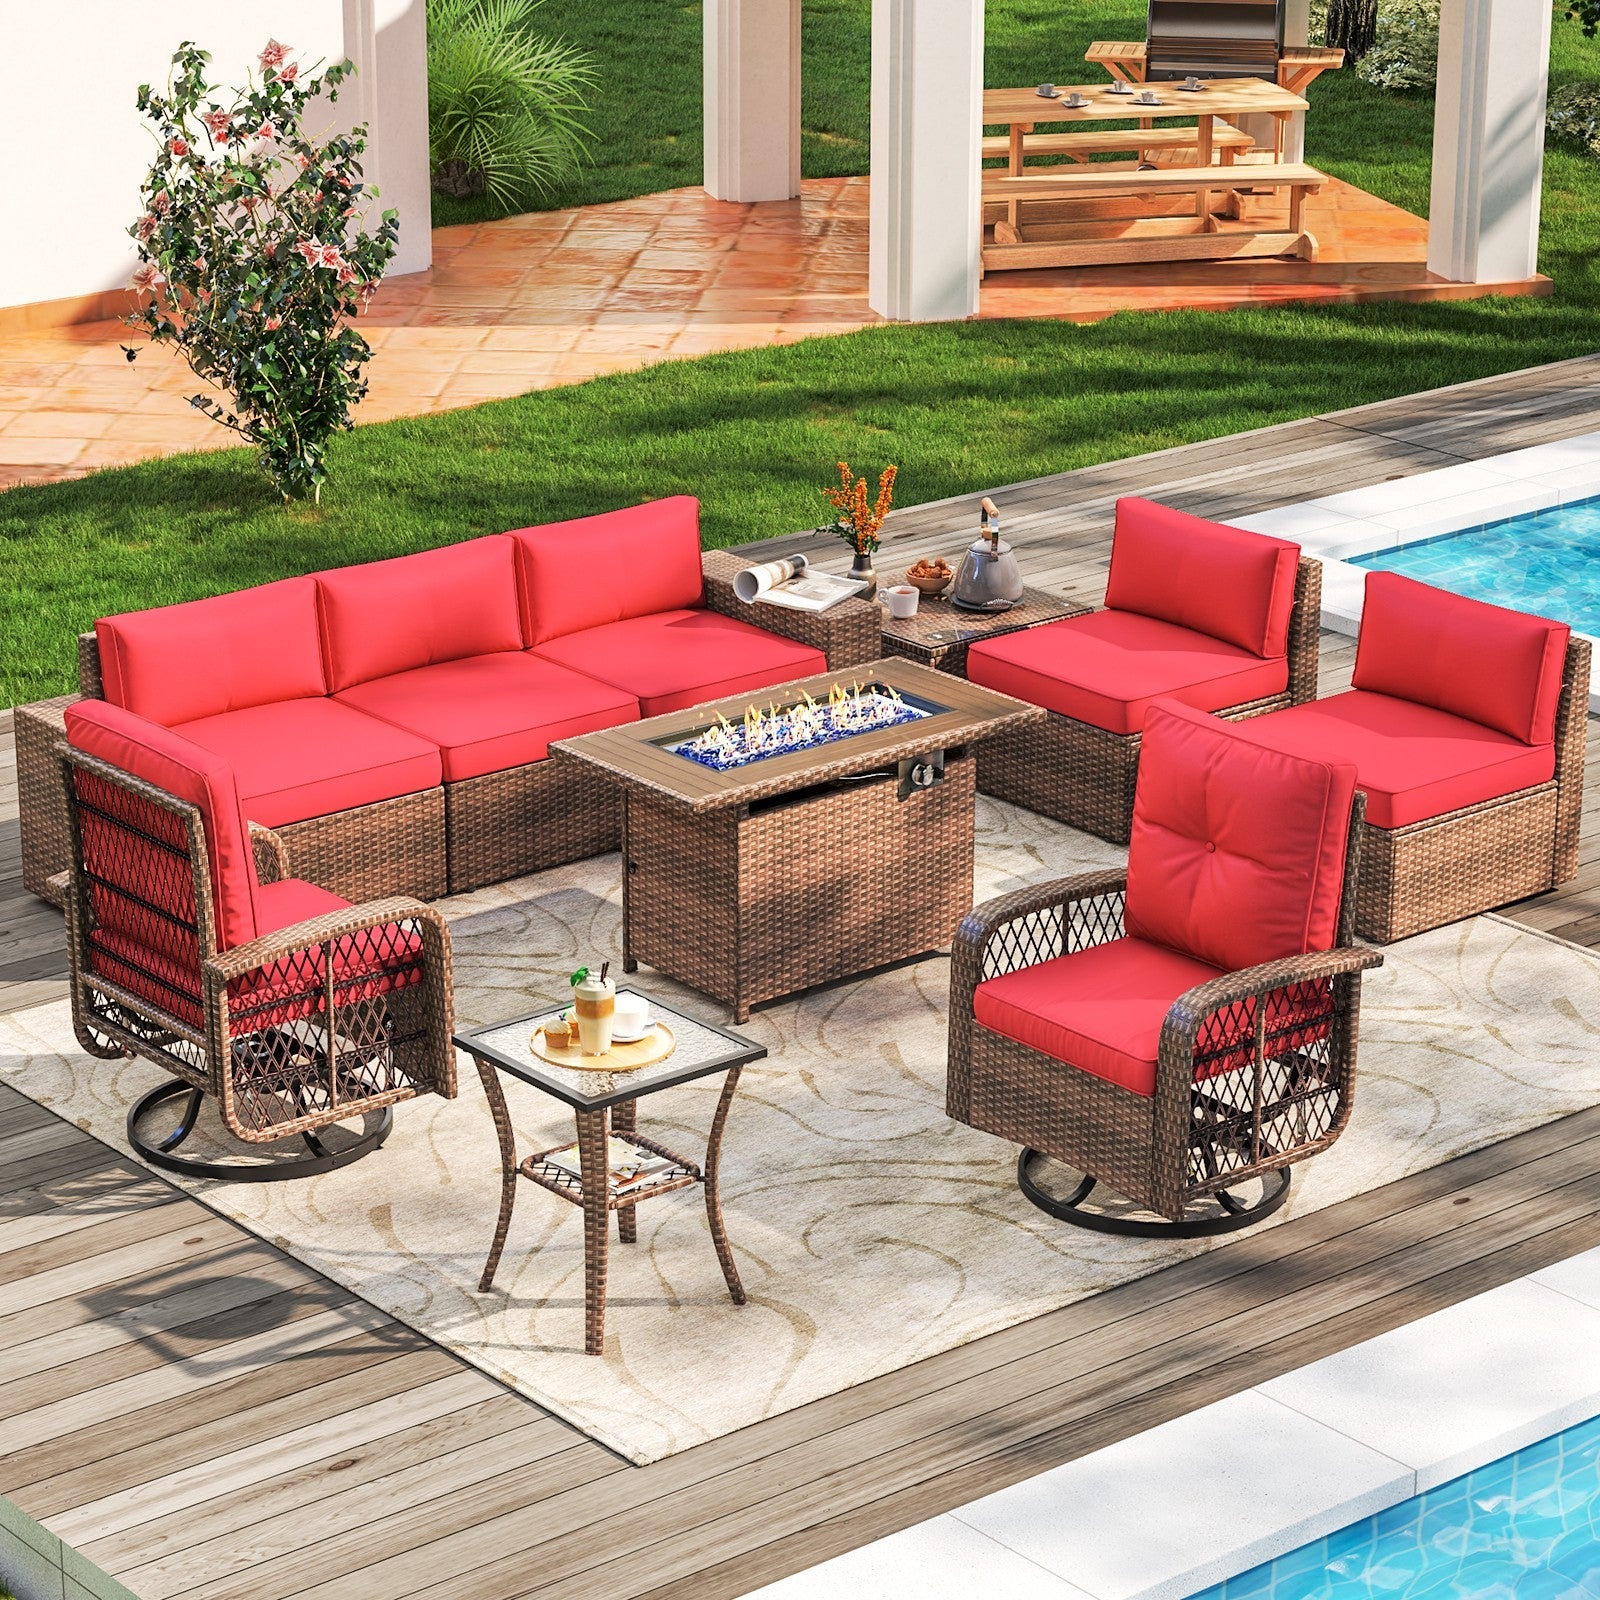 10 Pieces Patio Furniture Set Wicker Rattan Outdoor Furniture with Fire Pit Table Patio Sectional Sofa with Swivel Rocking Chairs for Deck, Backyard and Garden (Beige/Blue/Red)